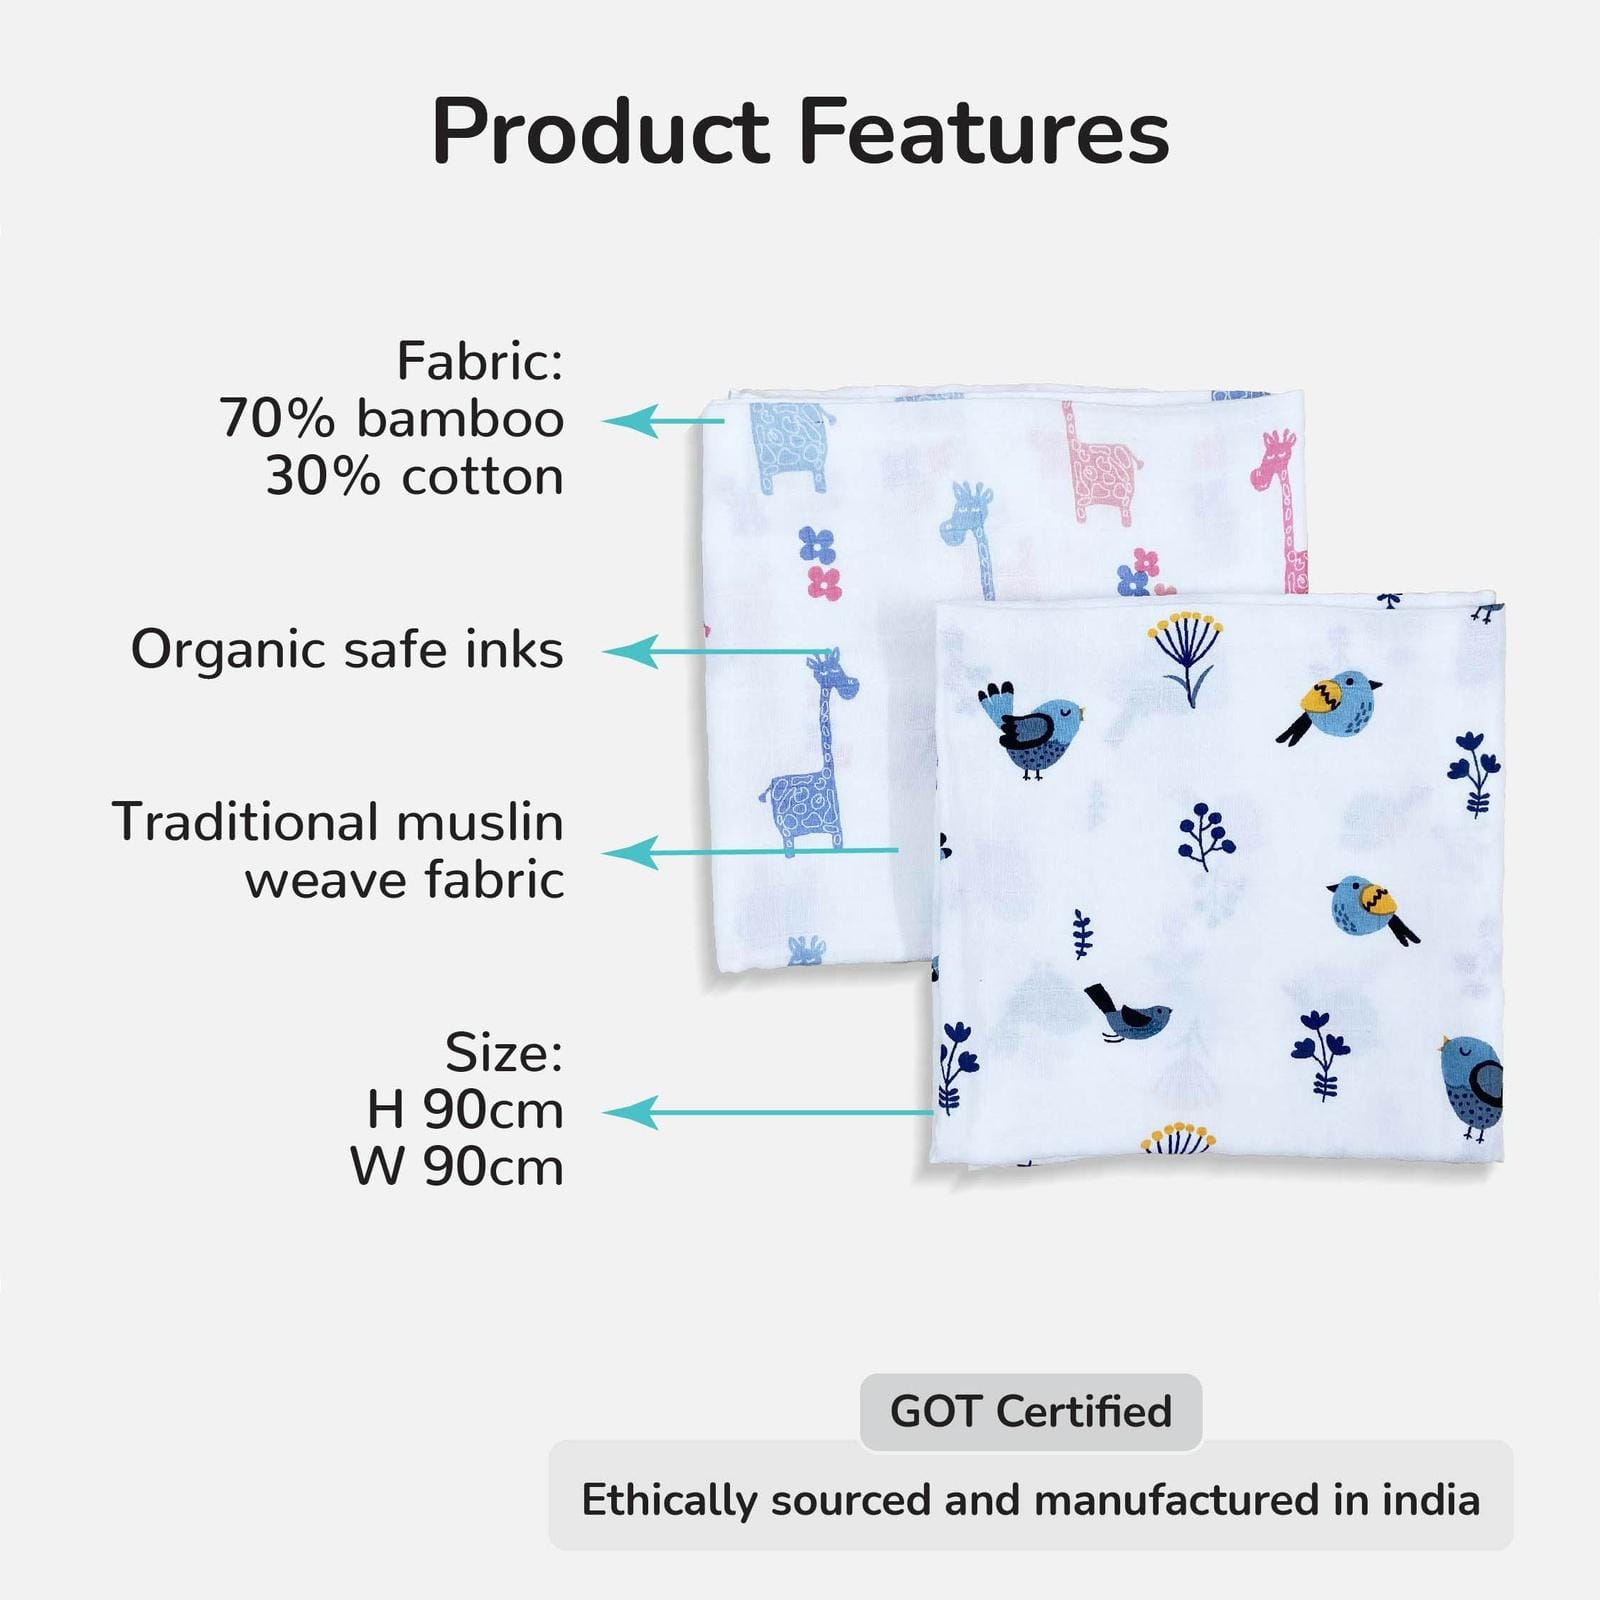 Baby swaddle features